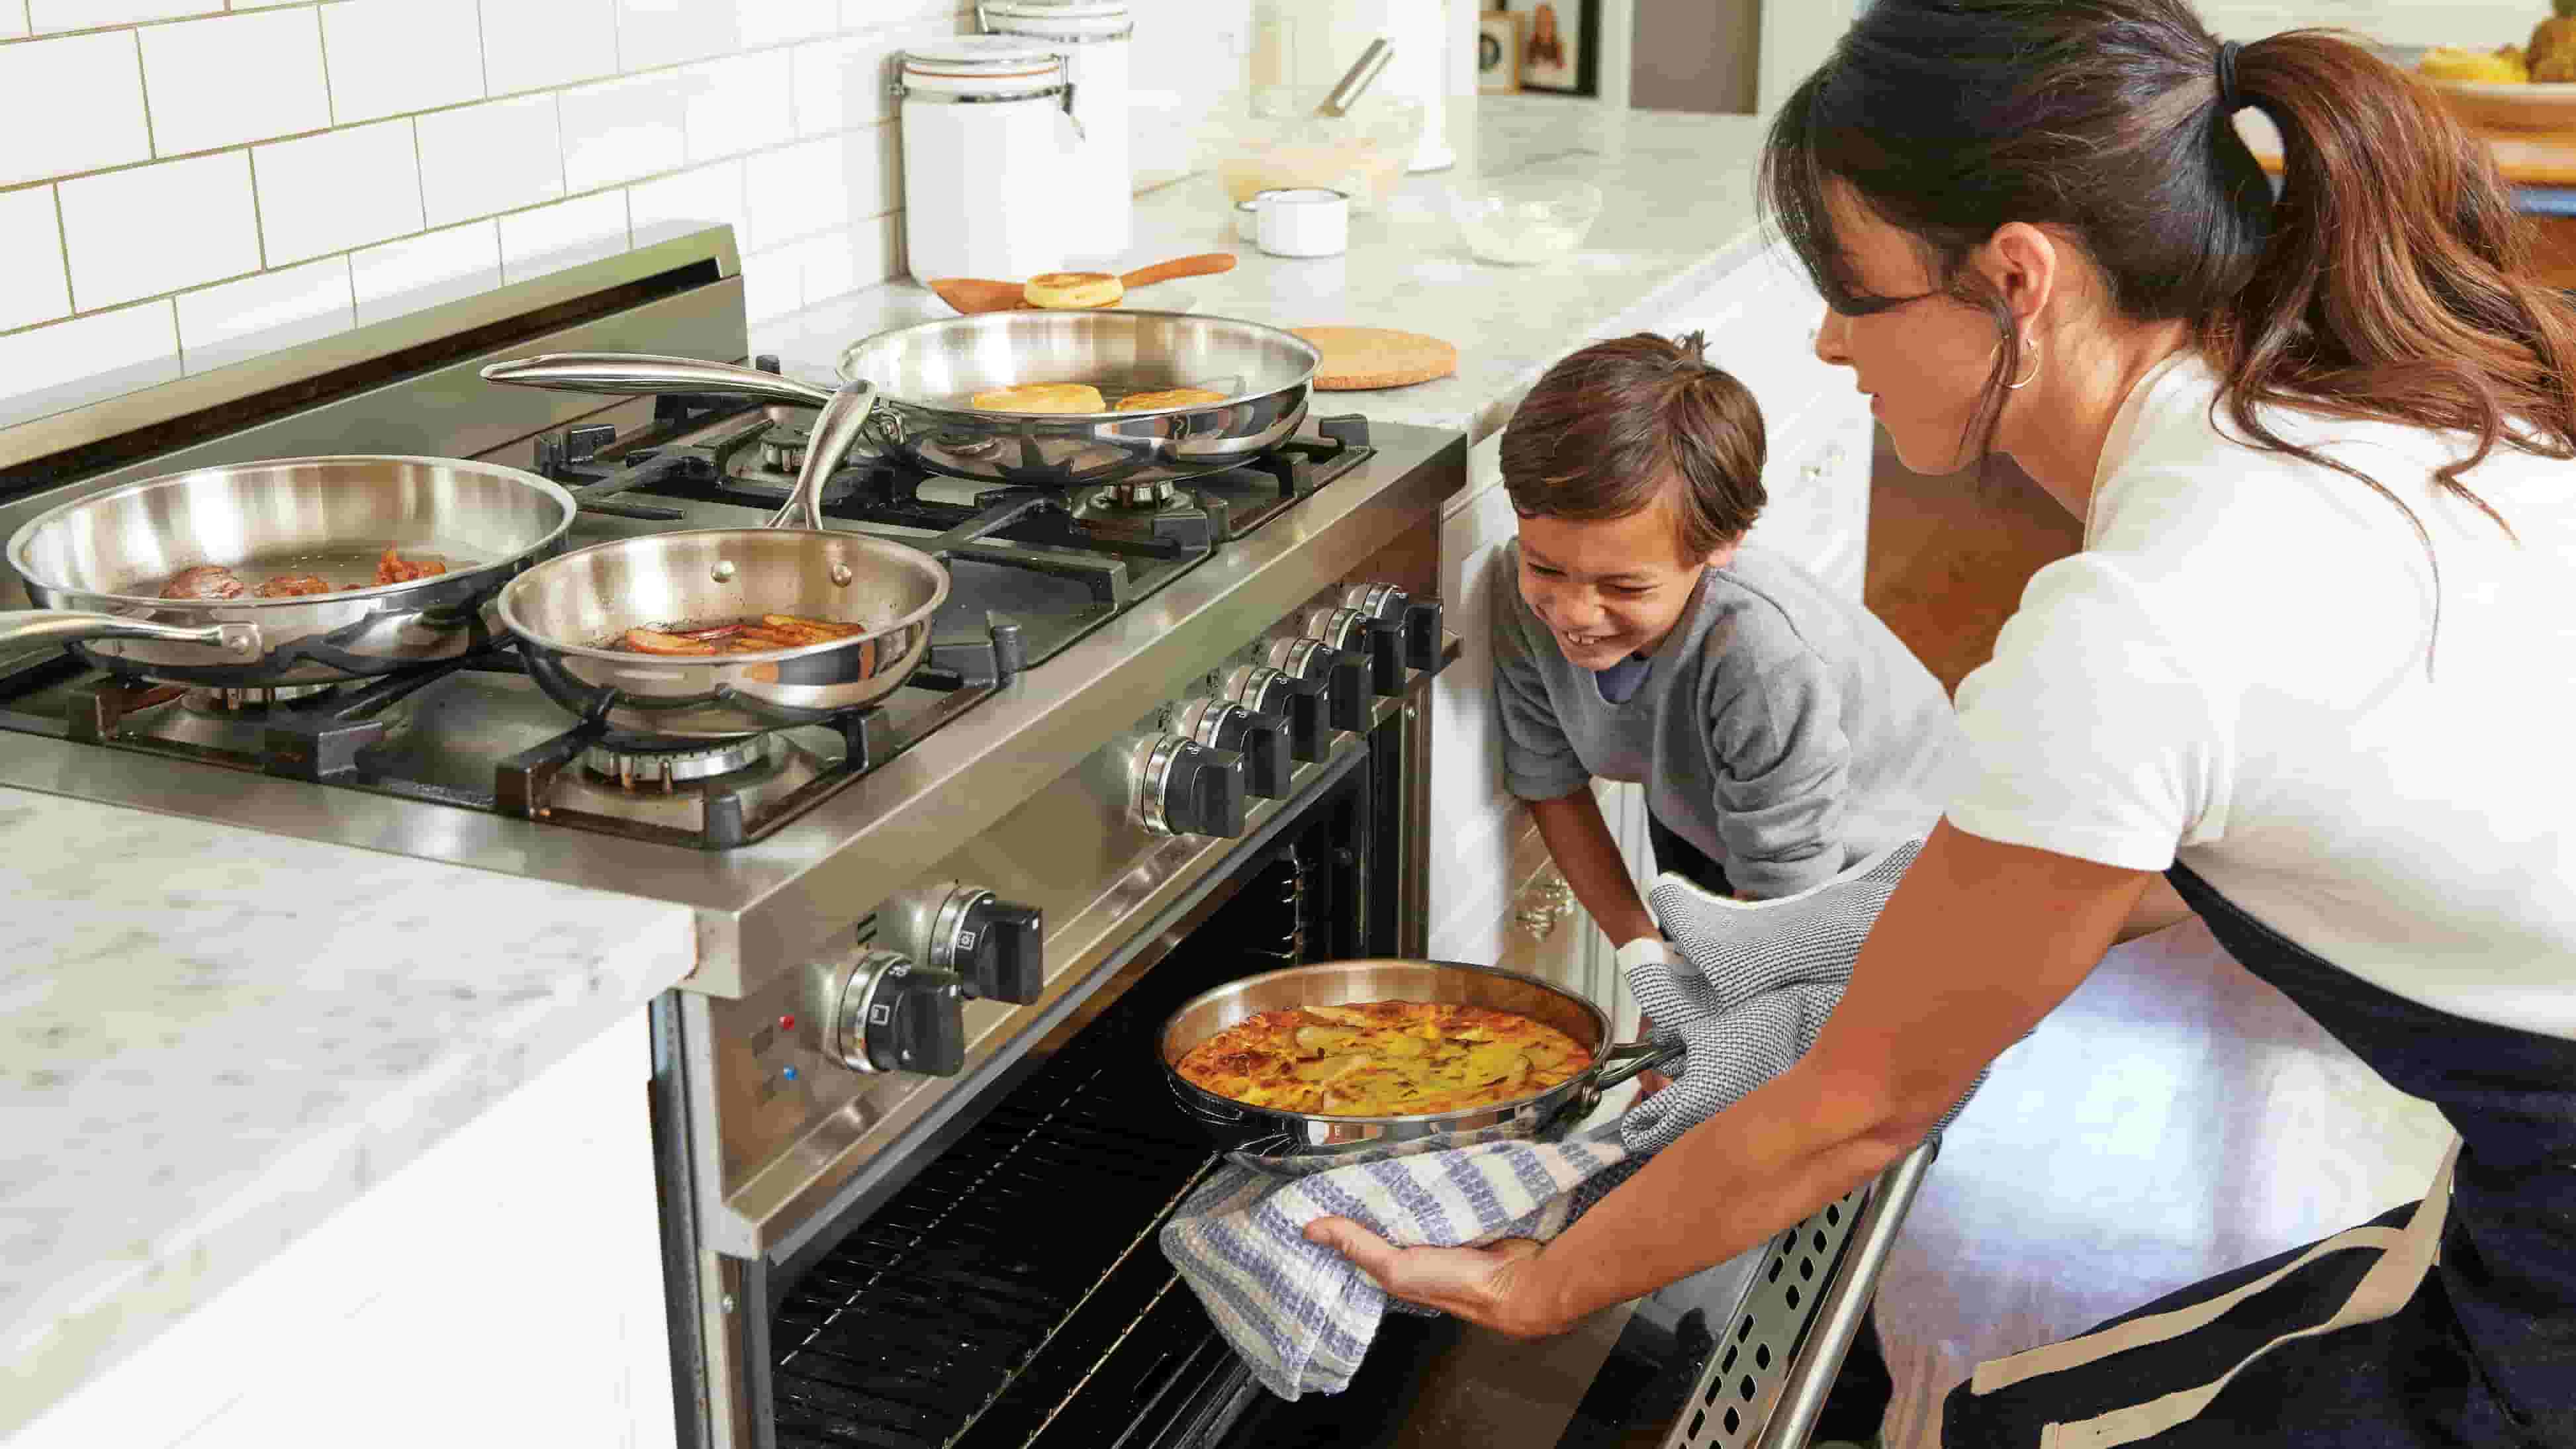 A young boy helps his mother cooking